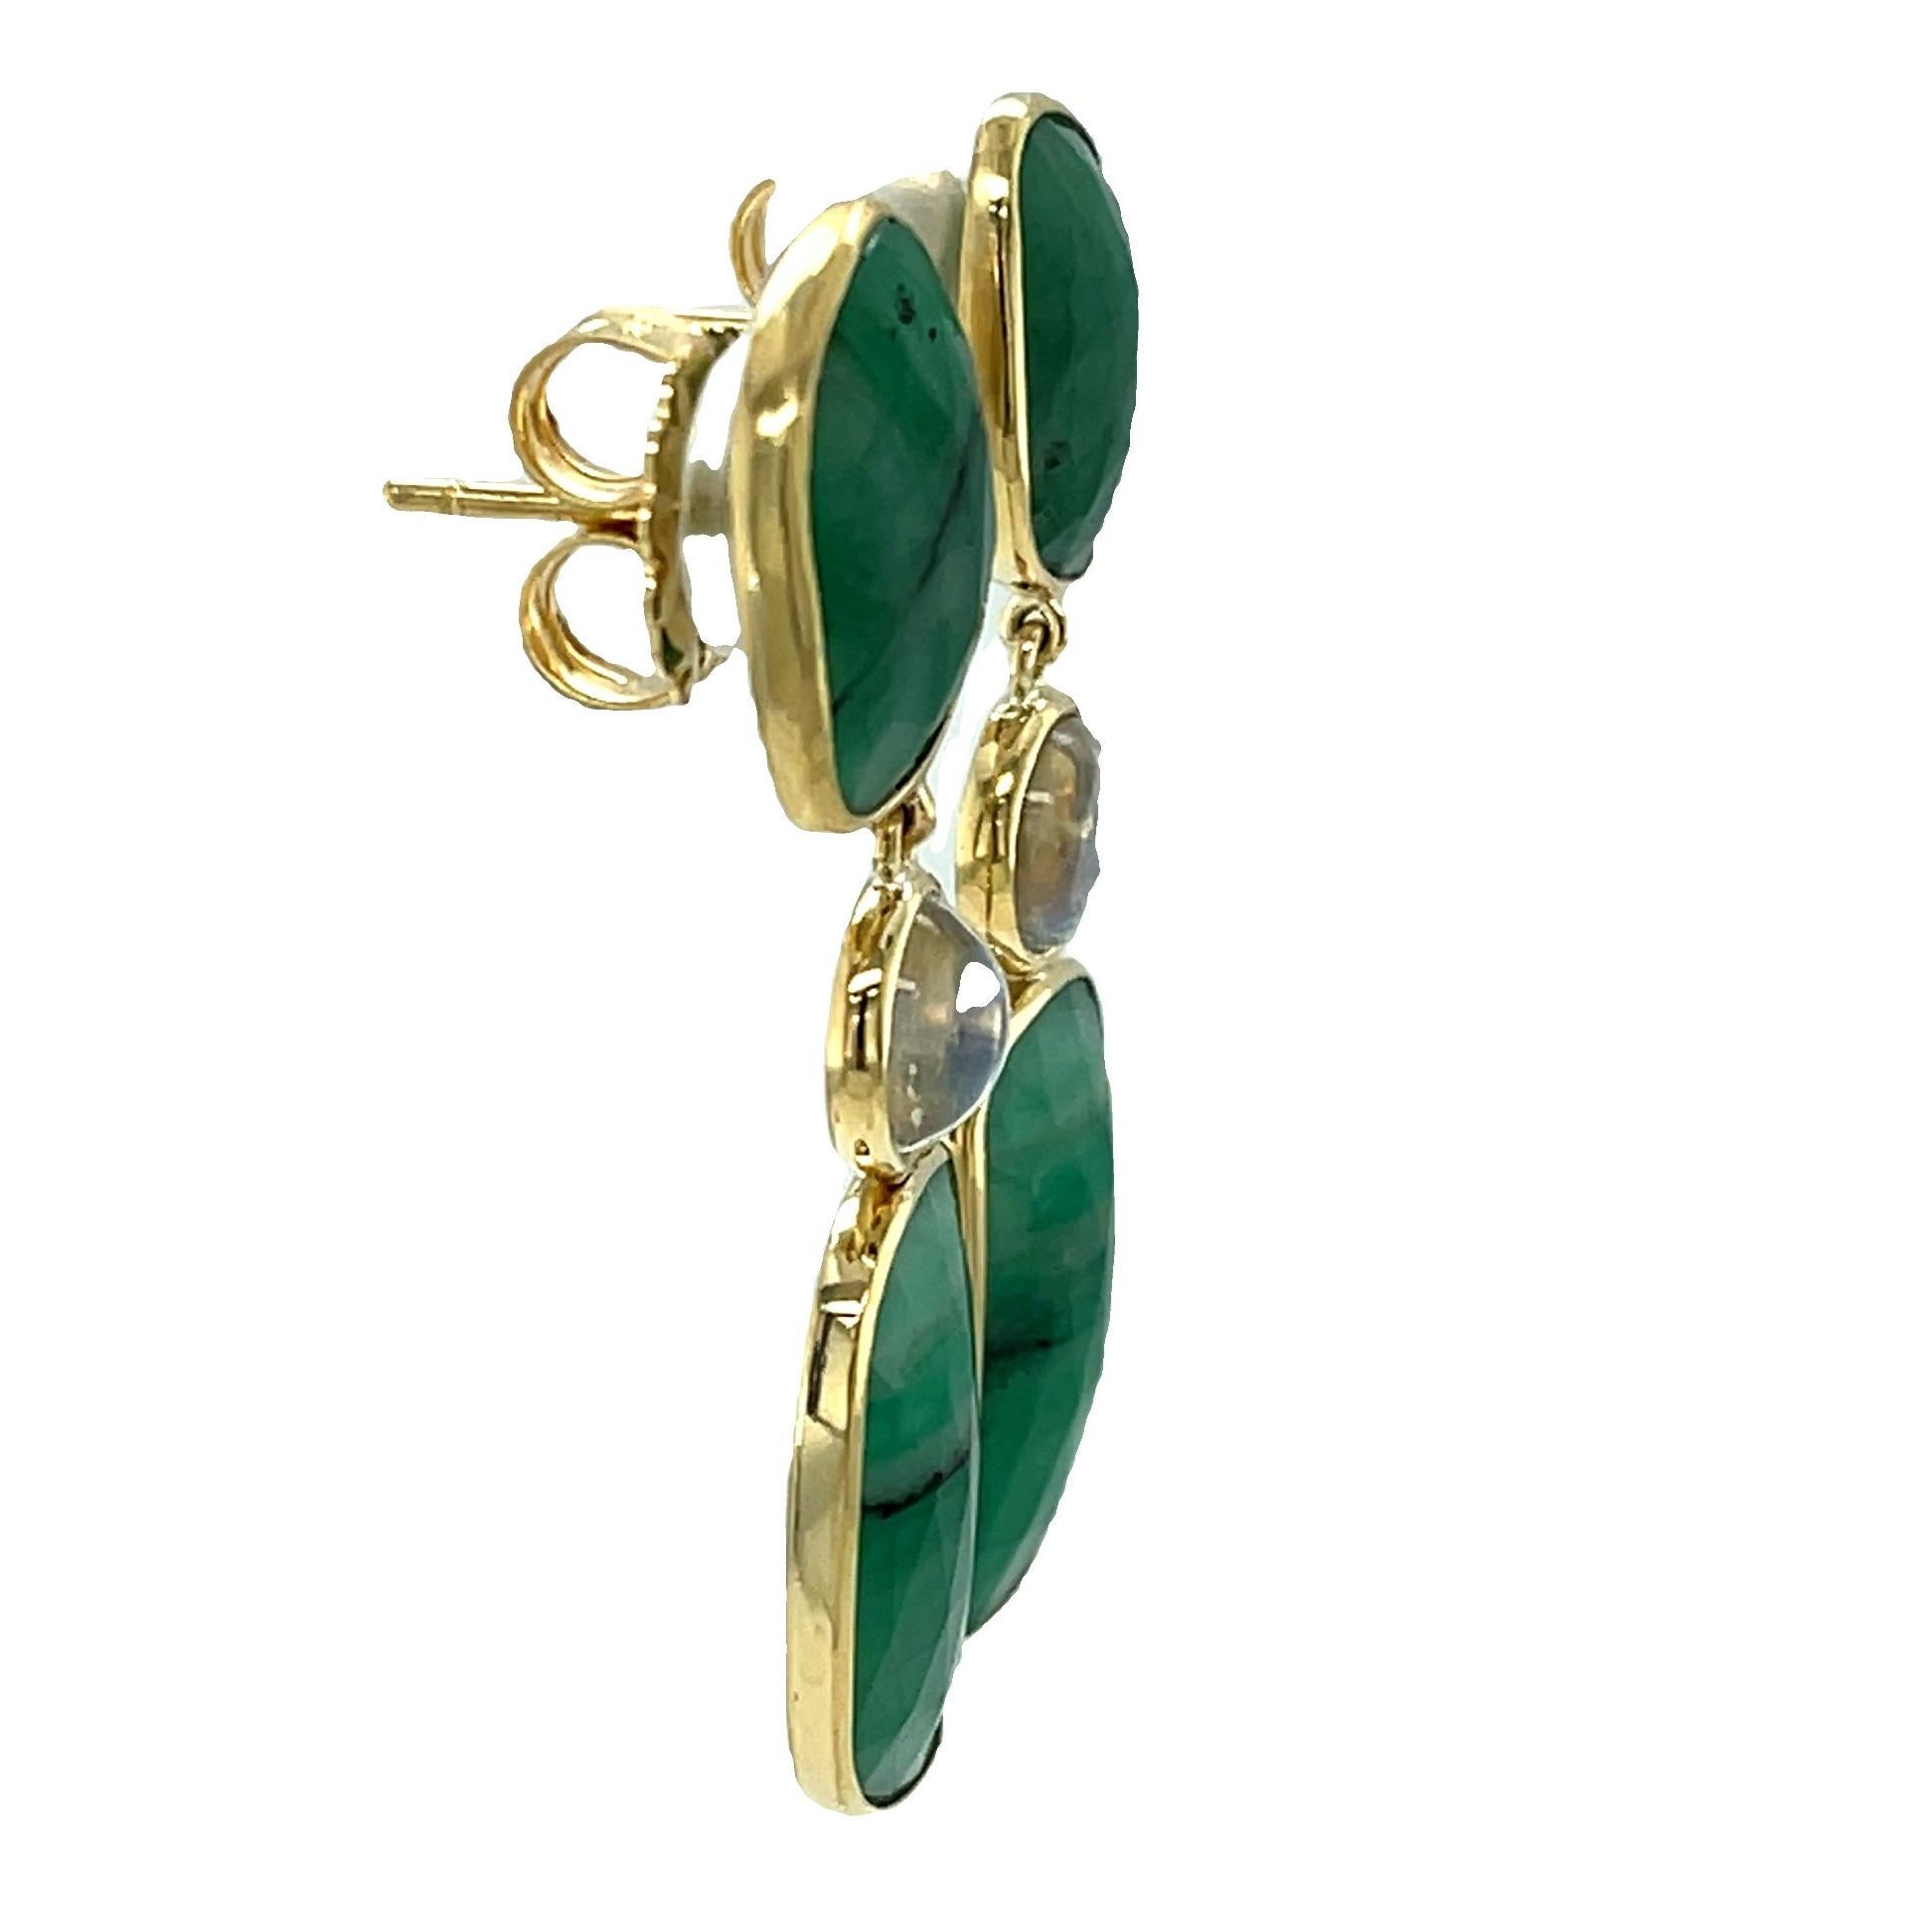 These beautifully dramatic and stylish earrings feature faceted emerald slices paired with rainbow moonstones set in 18k yellow gold! The emeralds are free-form in shape with luscious green body color variegated with natural black veining that give